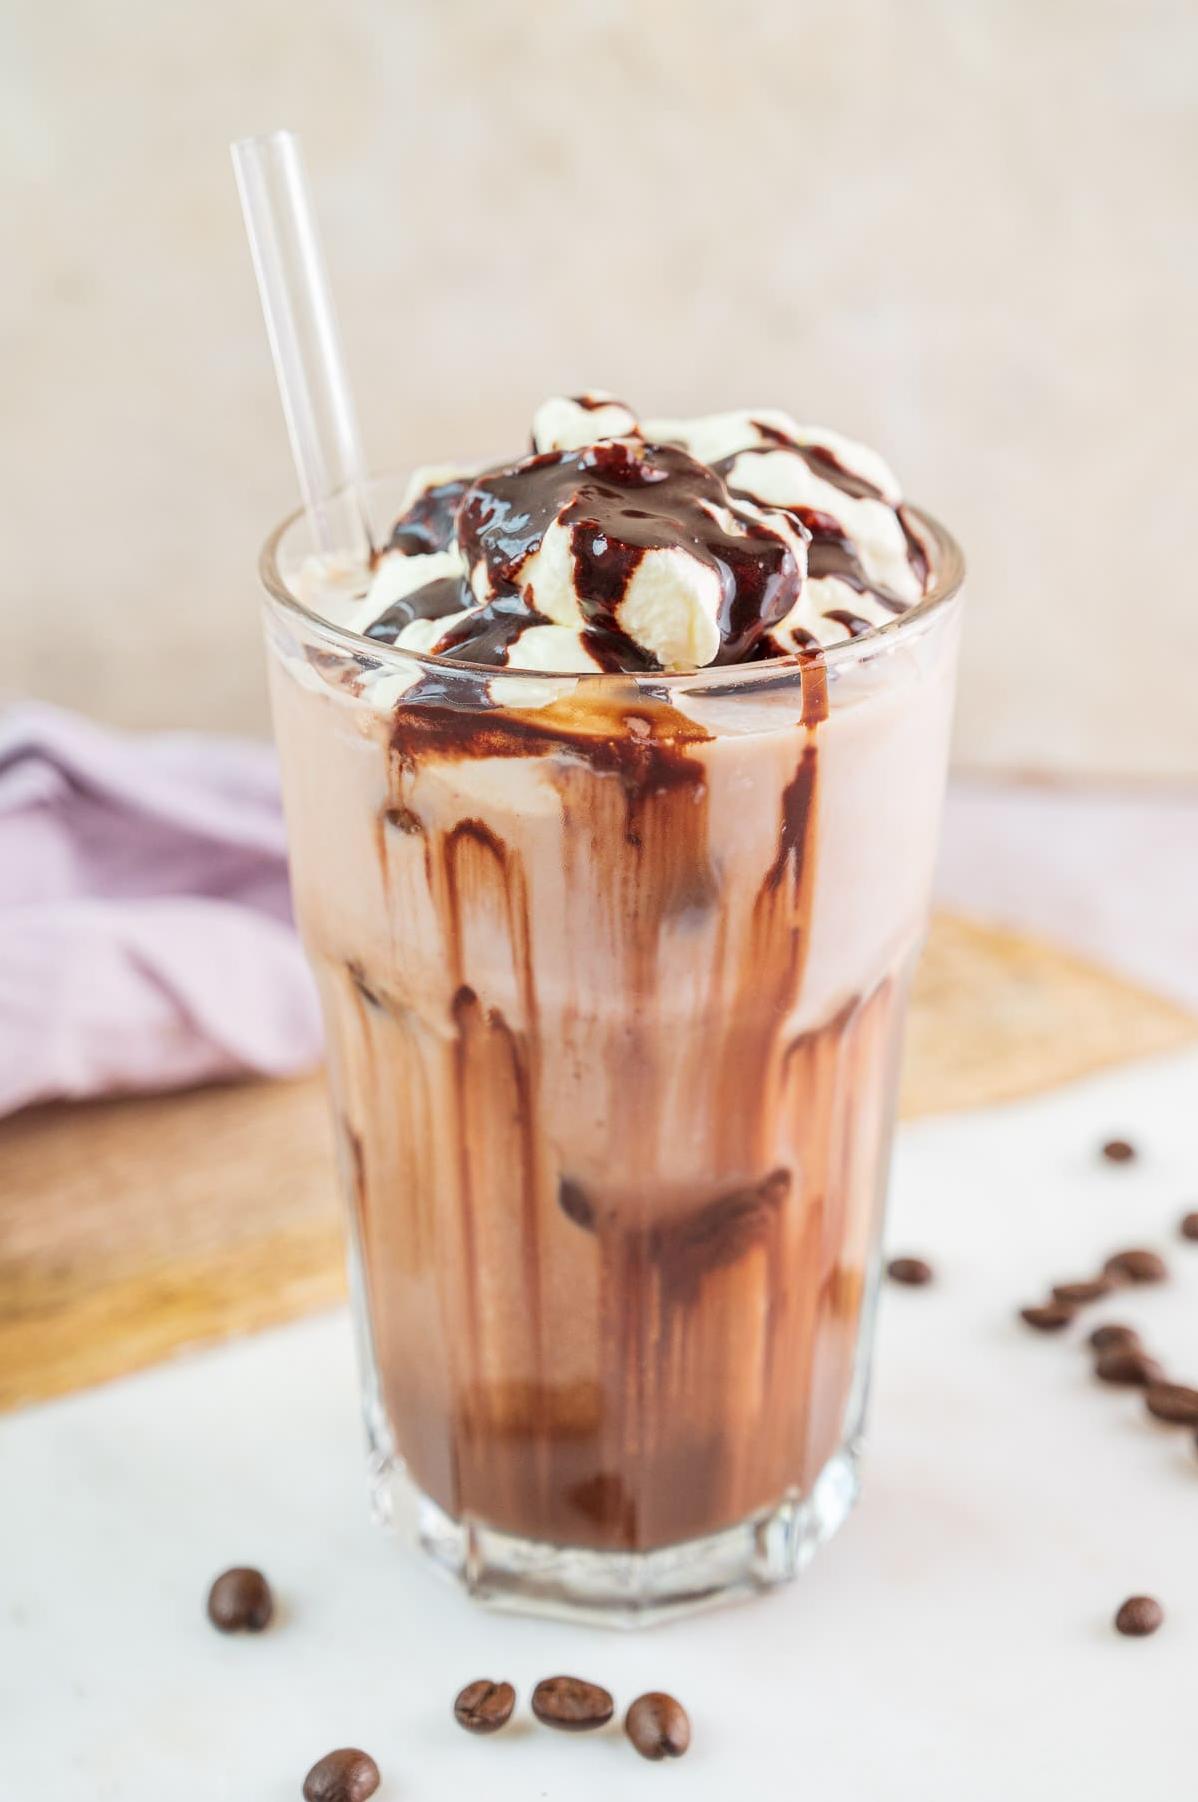  Treat yourself to a sweet and decadent iced mocha latte.